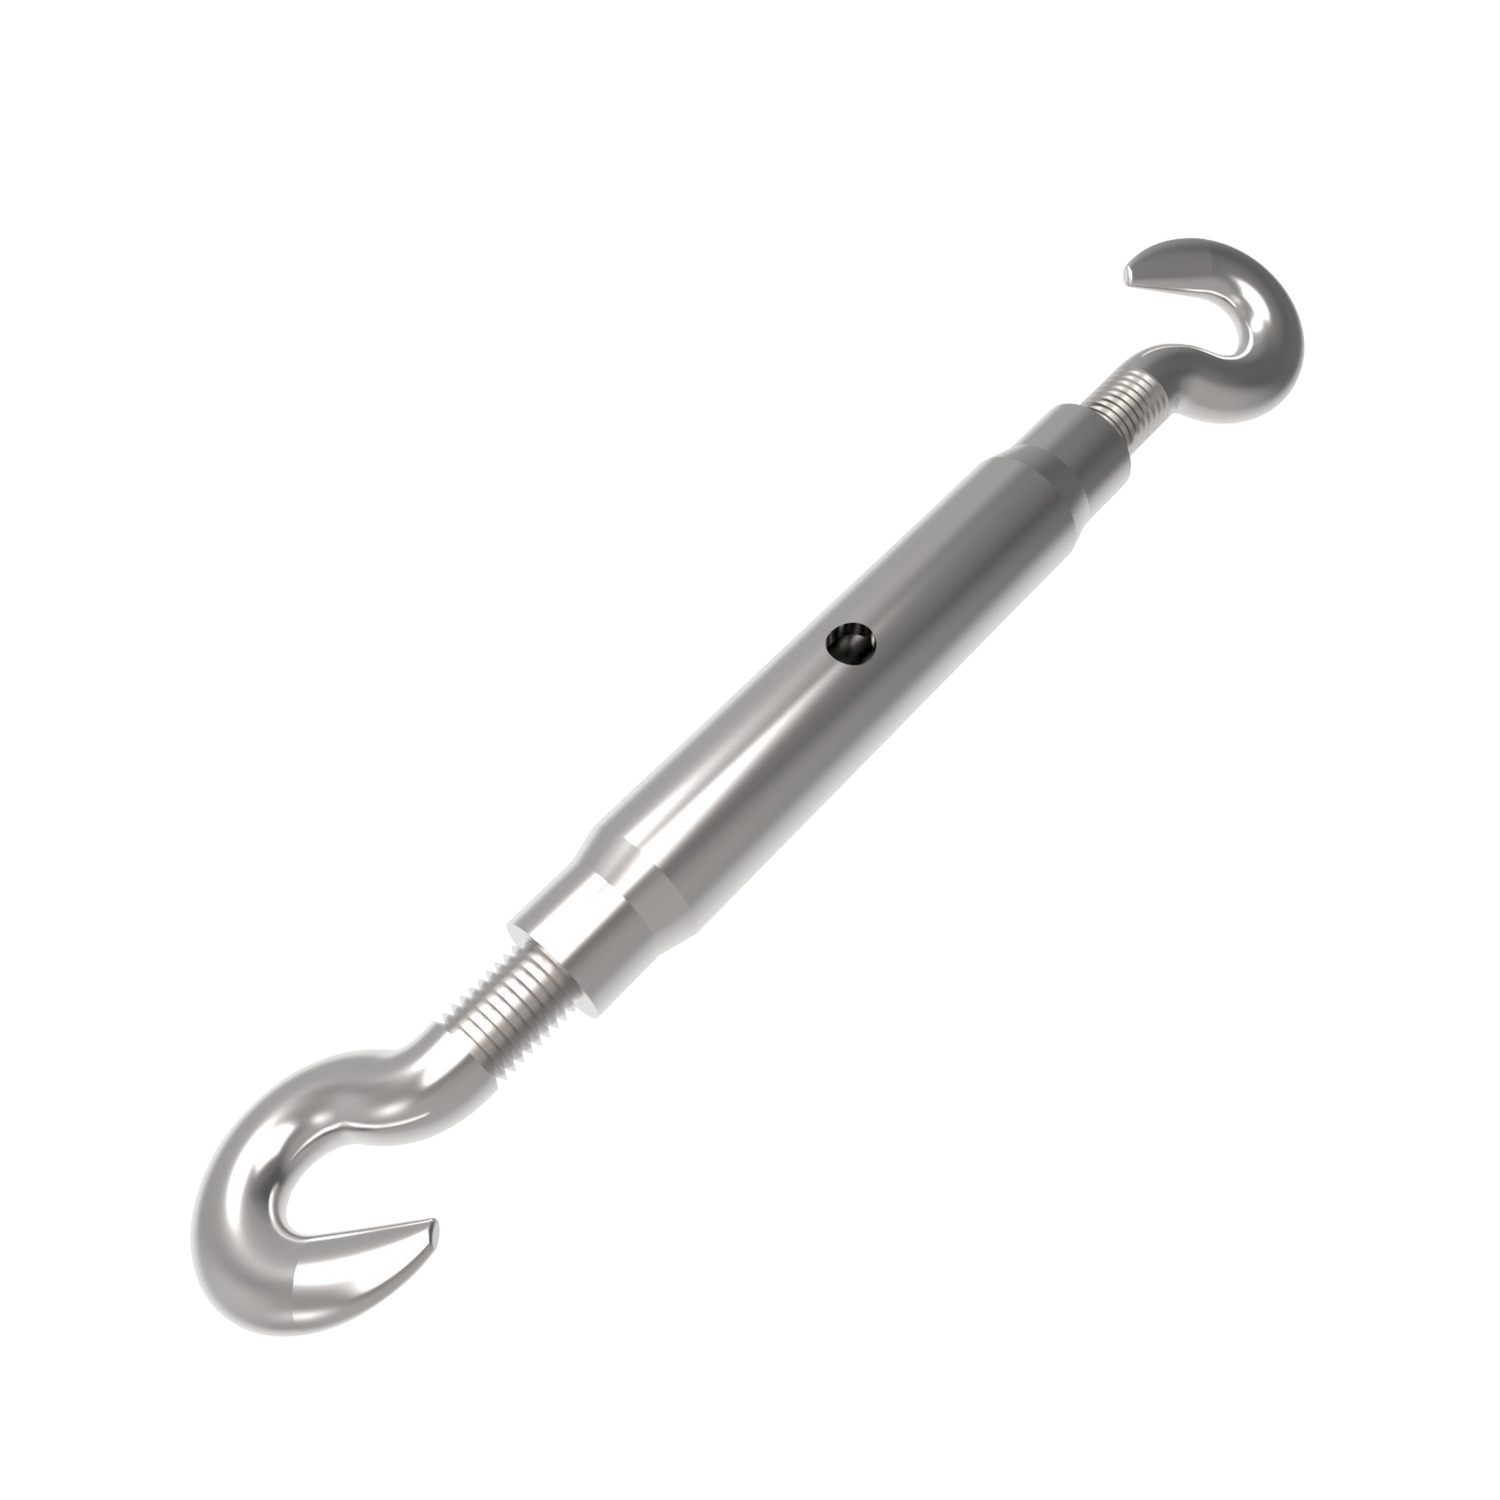 R3816.006-ZP Hook End Pipe Body Turnbuckles M6 steel Not to be used for lifting unless SWL marked.